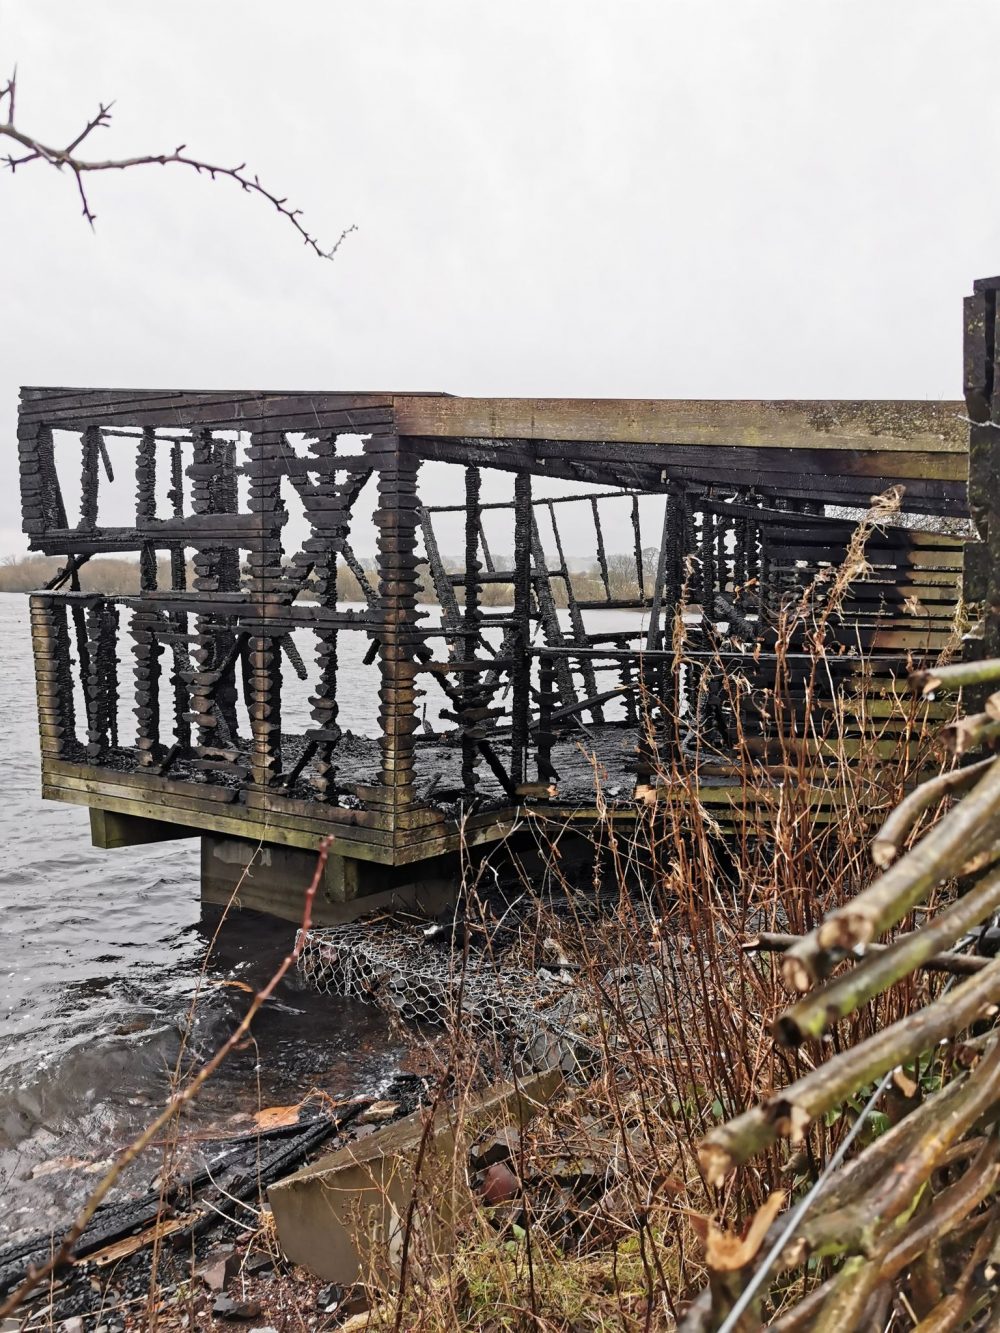 The hide after the fire NatureScot - Court and Crime News Scotland